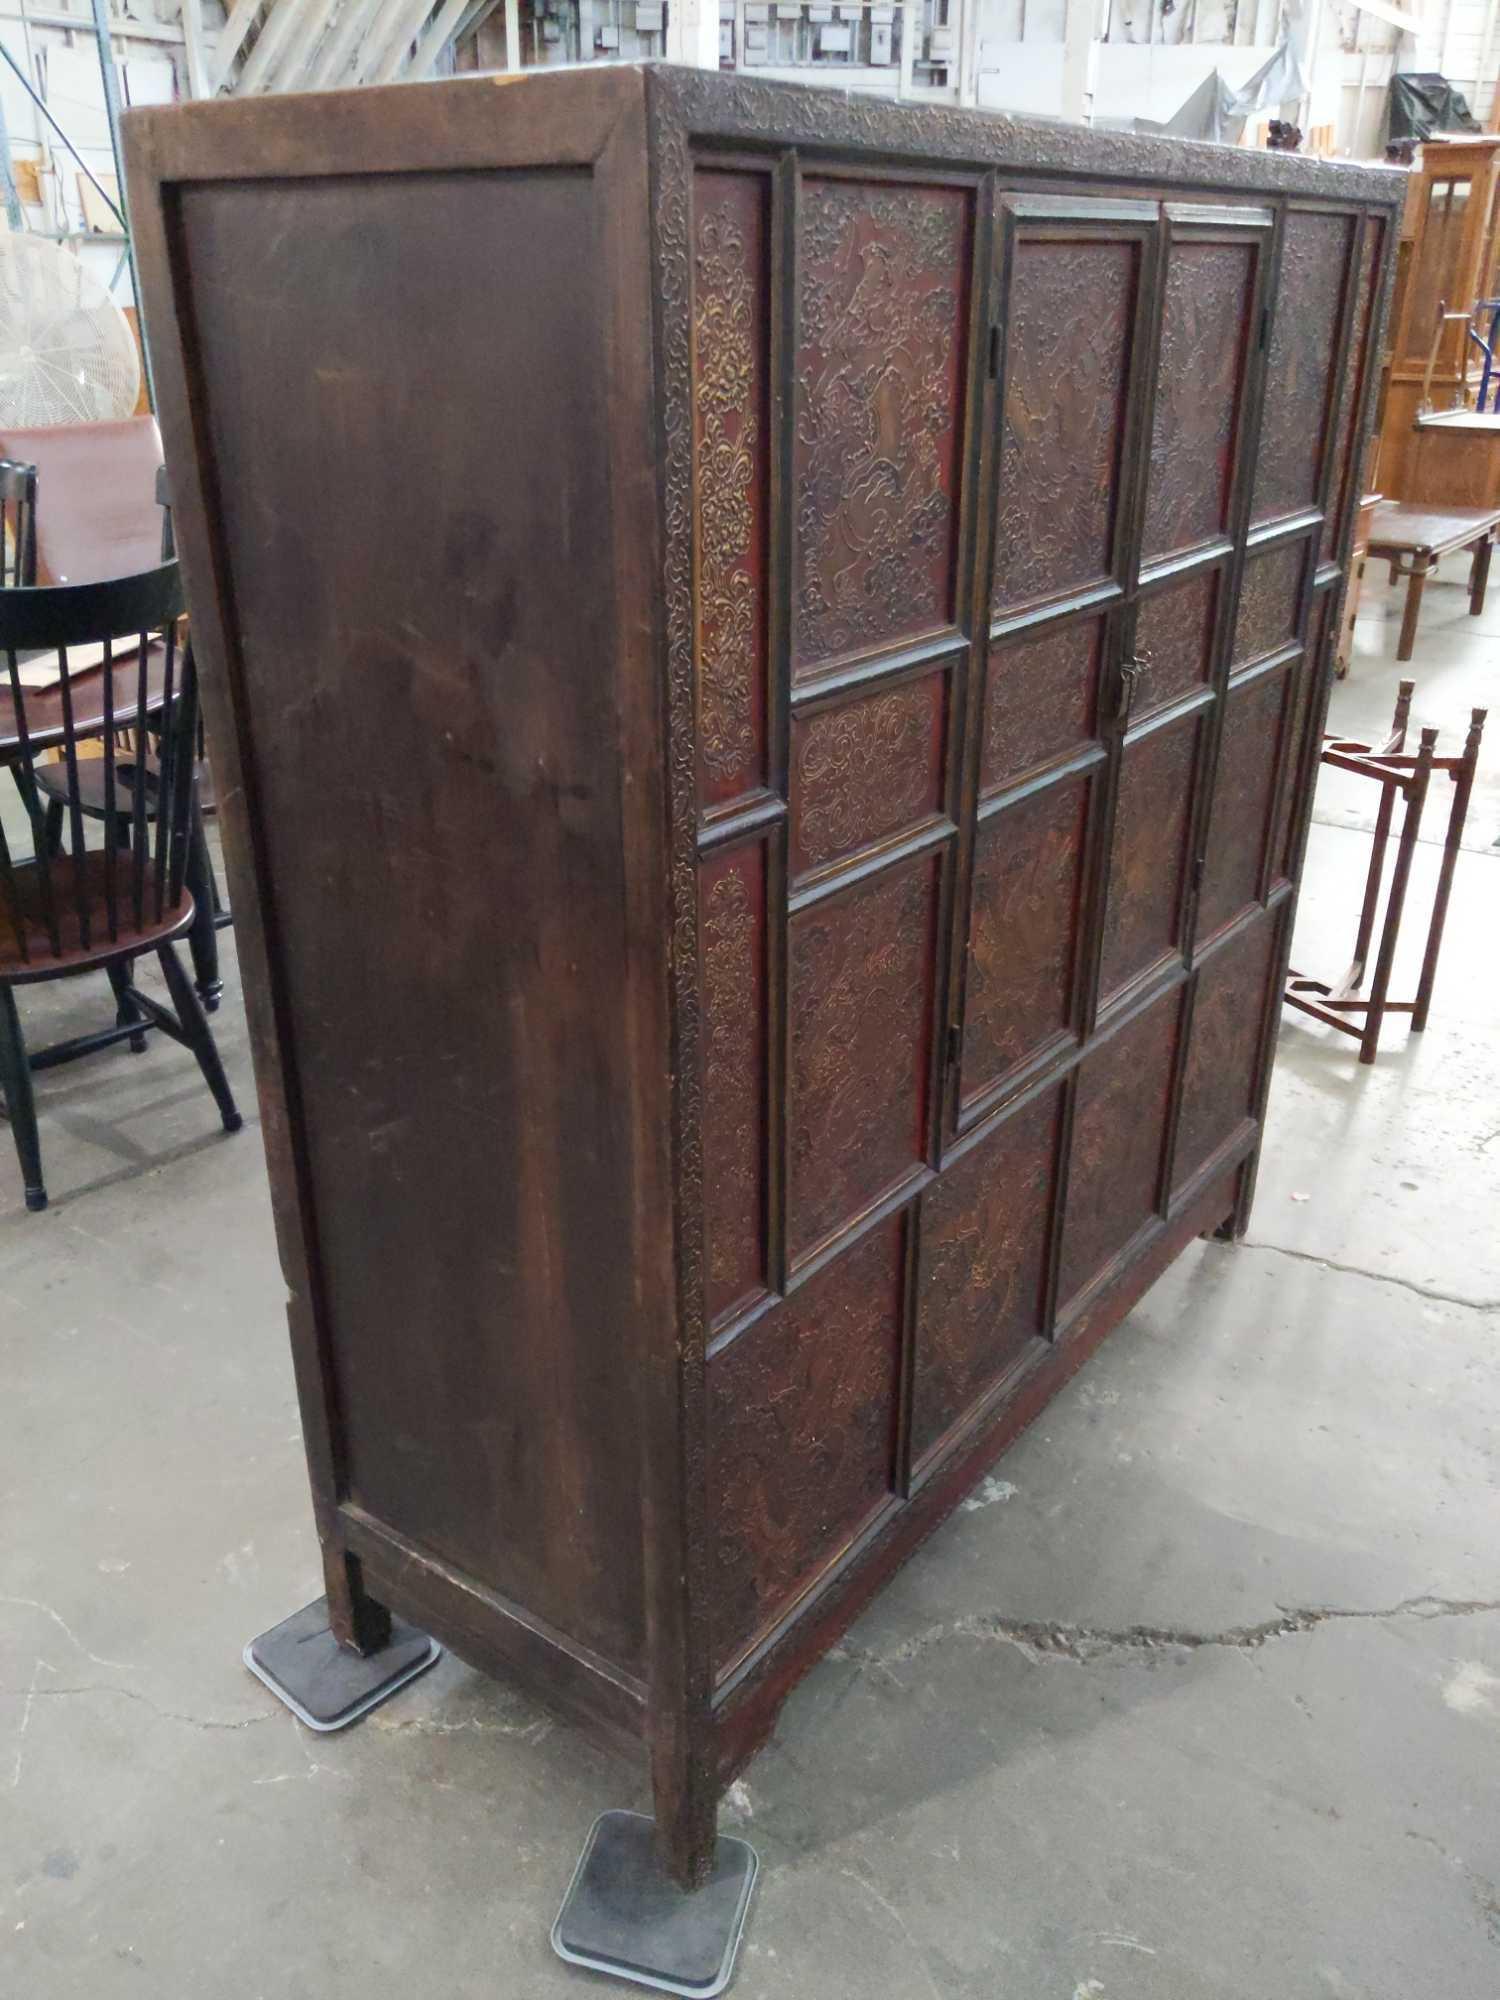 Stunning Antique 19th century (?) Mahogany Chinese Cabinet w/ Ornate Scene on front, see desc